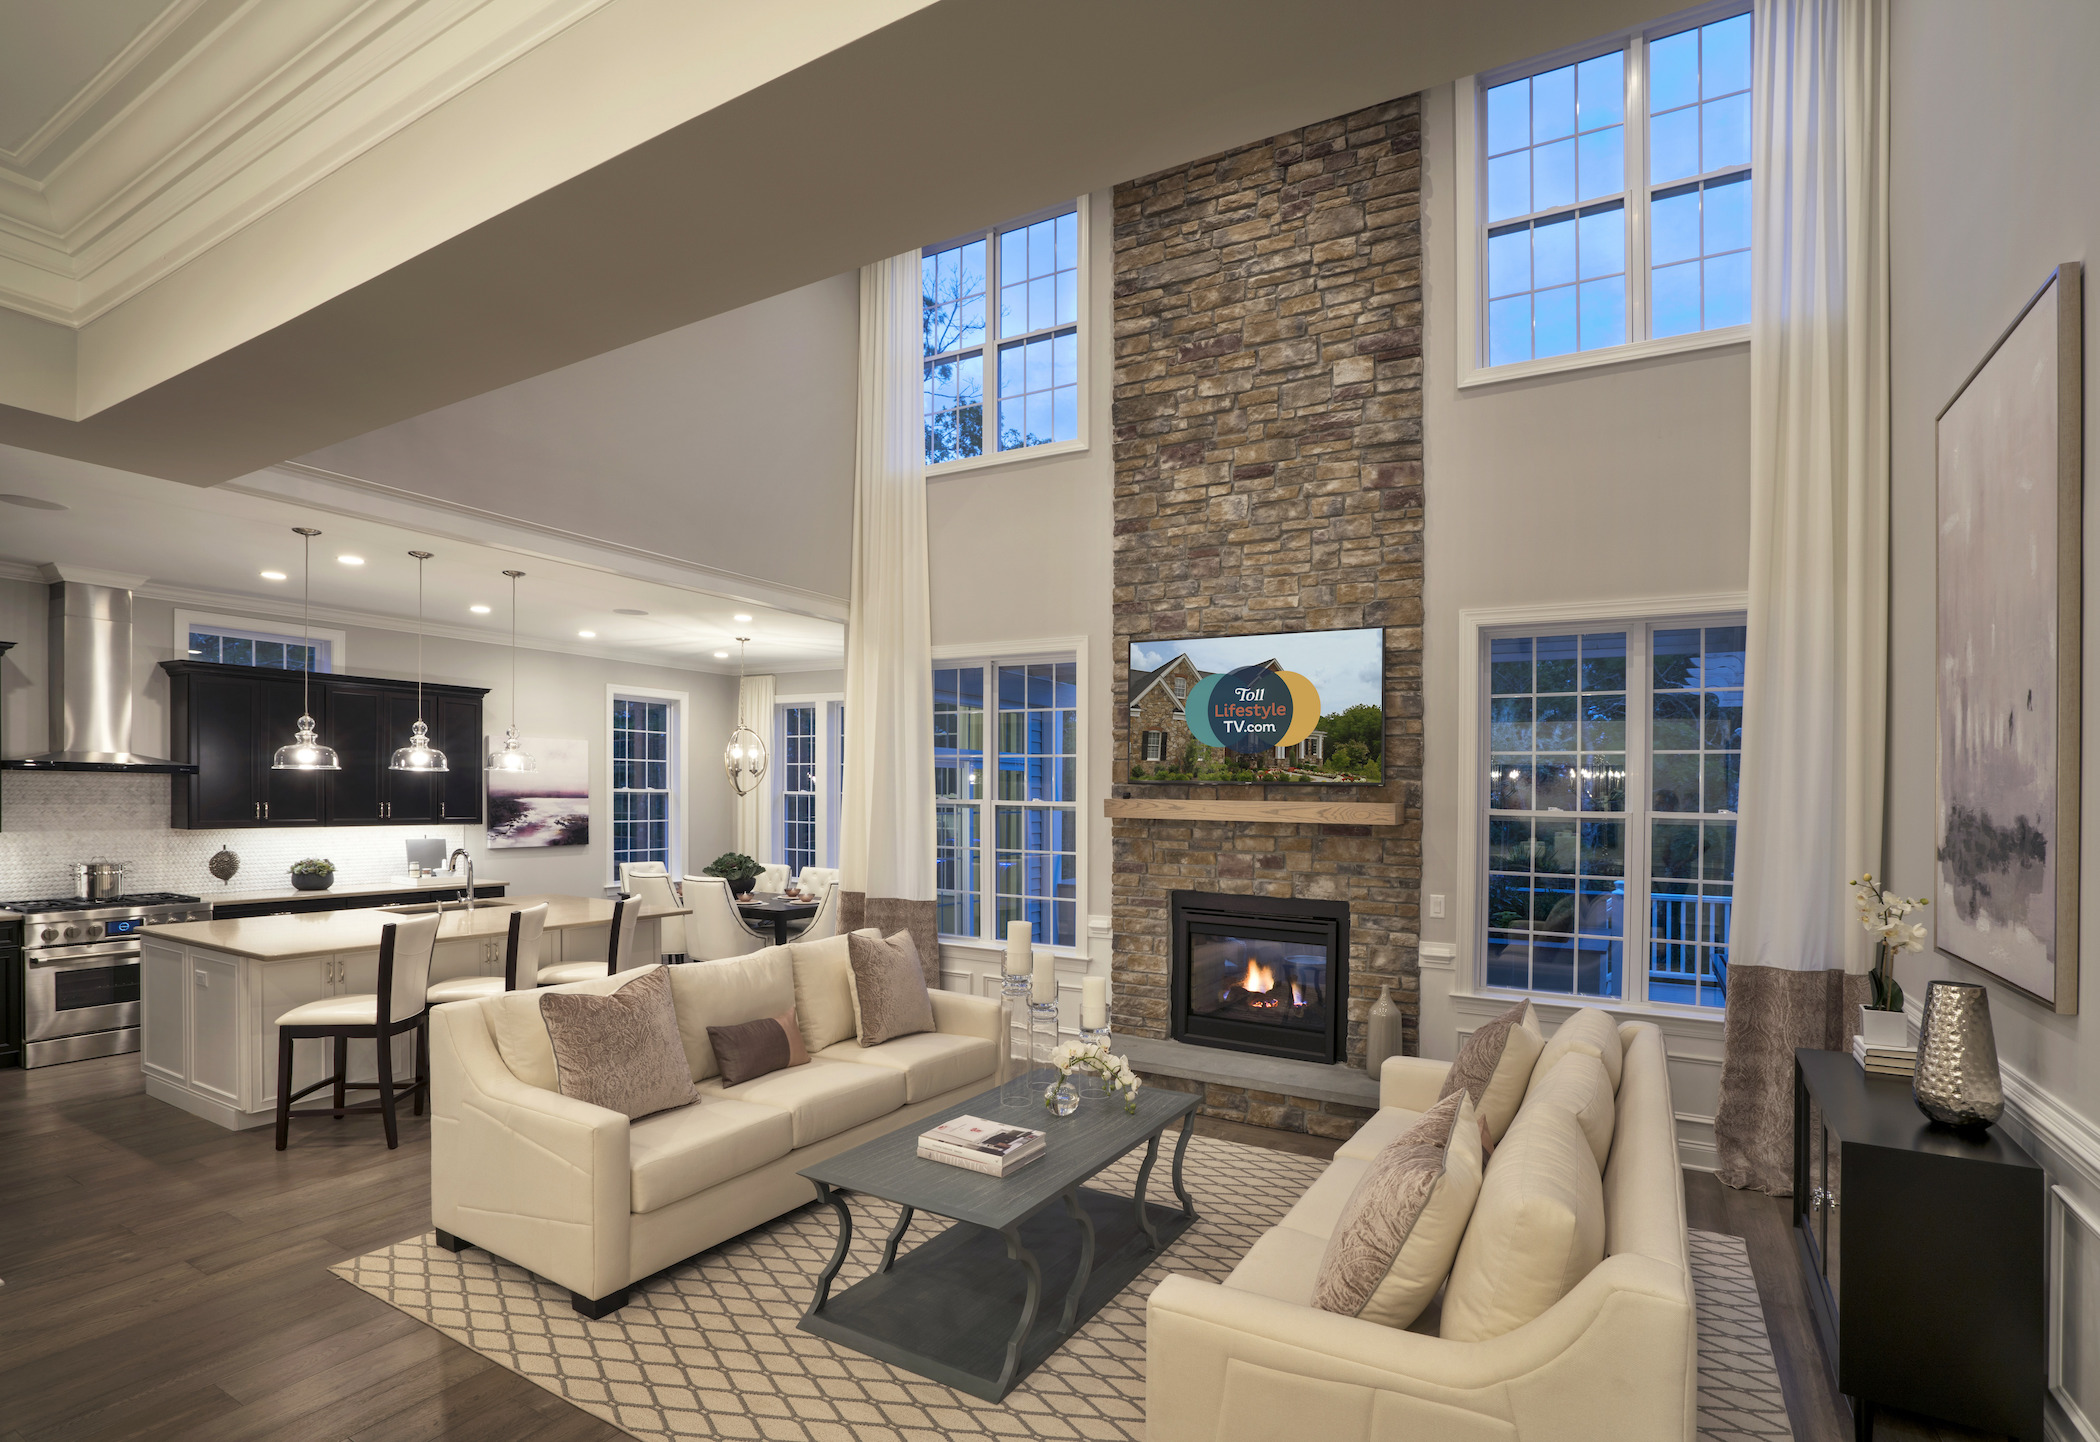 Impressive great room featuring stone fireplace and ample natural lighting.